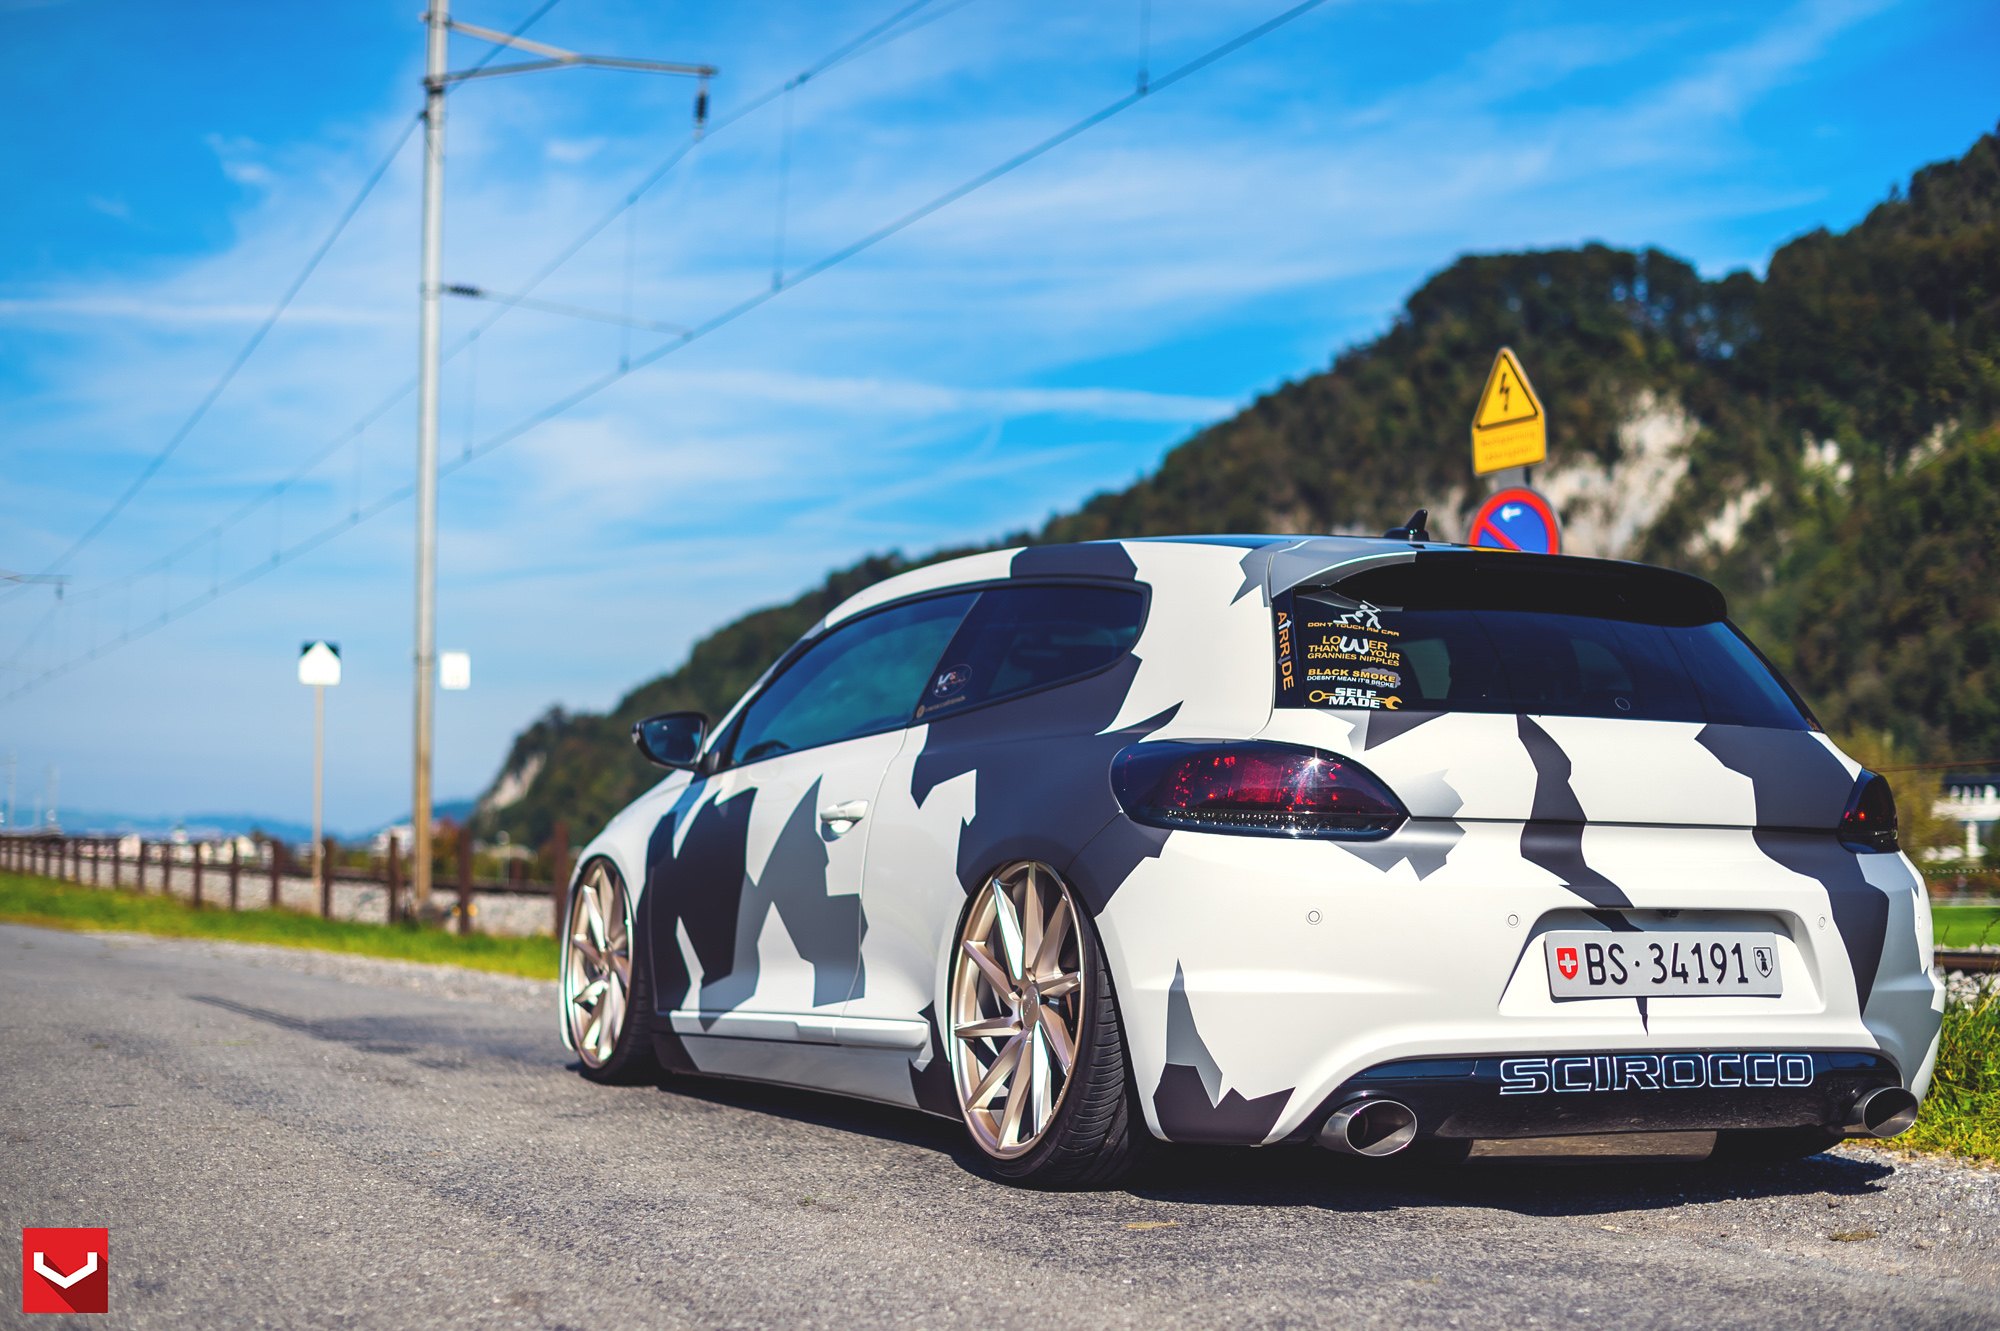 Aftermarket Roofline Spoiler on White Camo VW Scirocco - Photo by Vossen